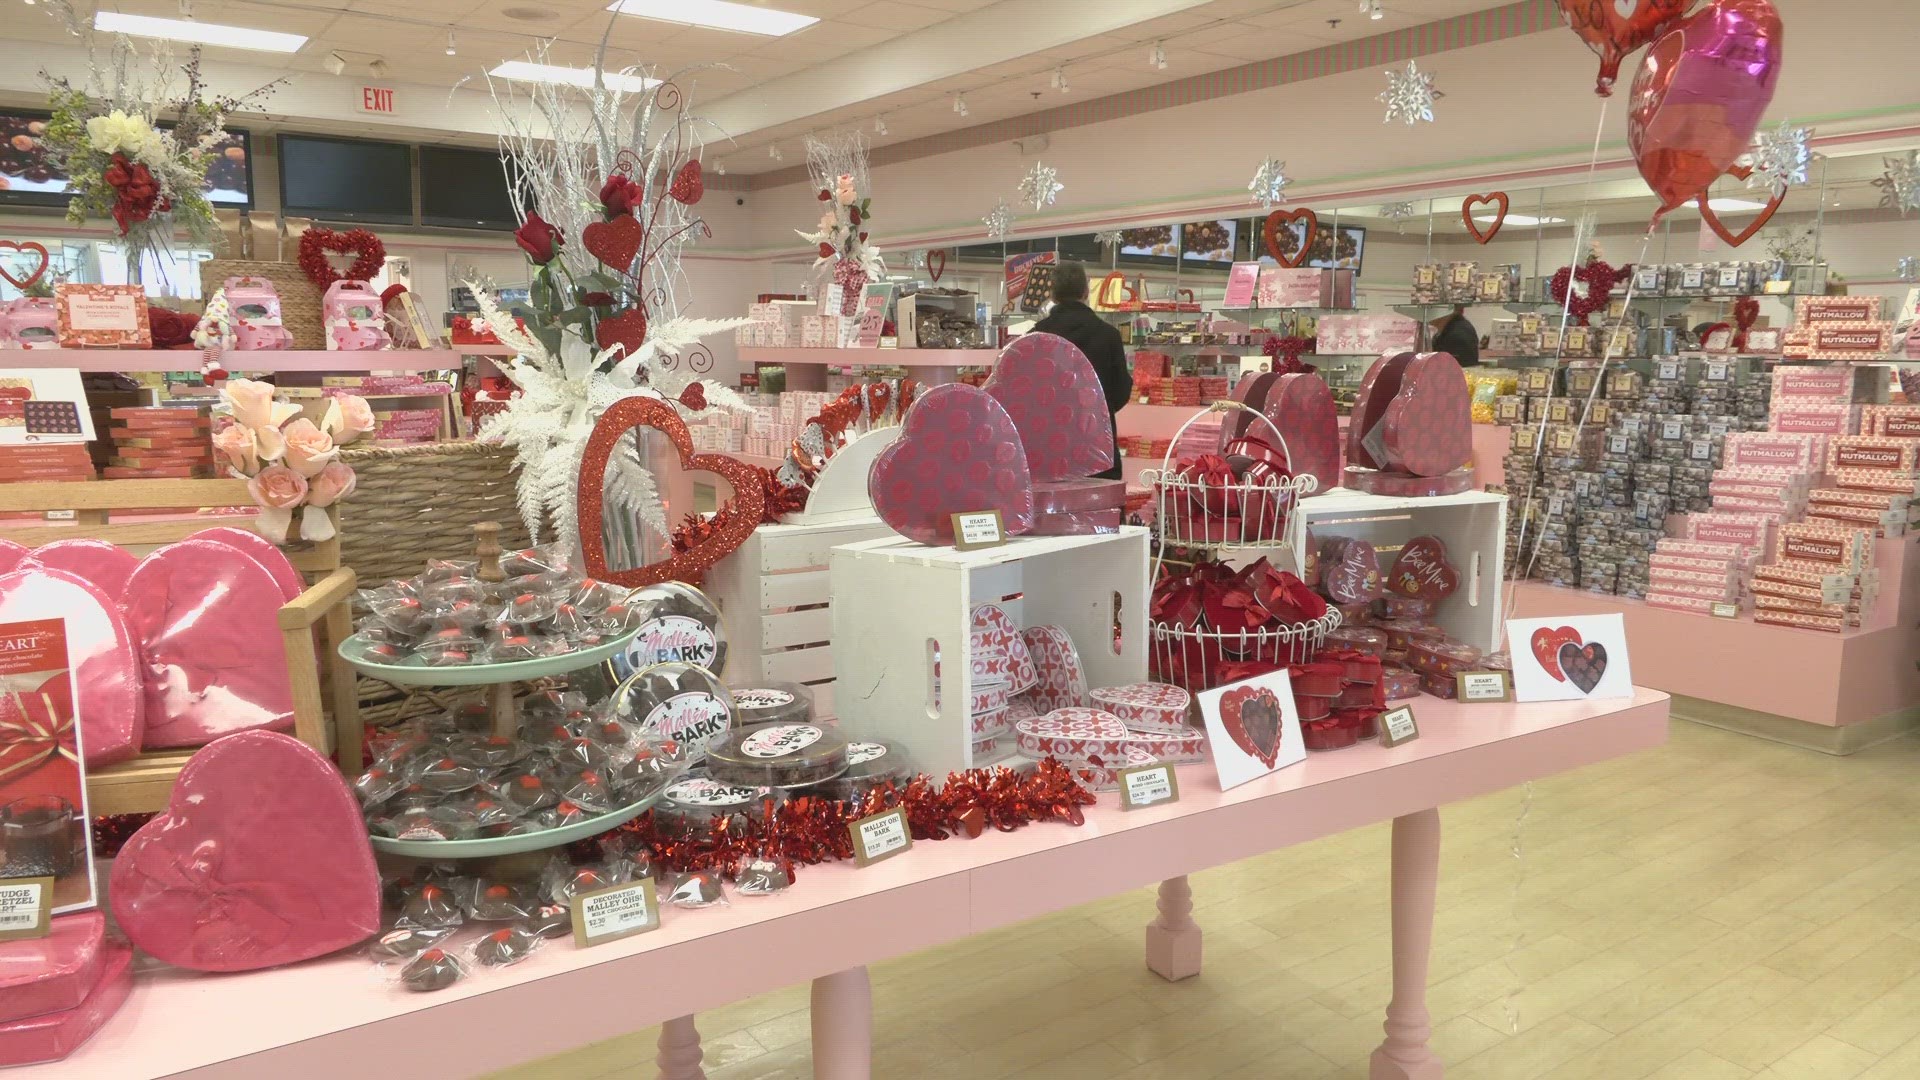 Looking for last-minute gift ideas for Valentine's Day? 3News' Austin Love has several ideas.